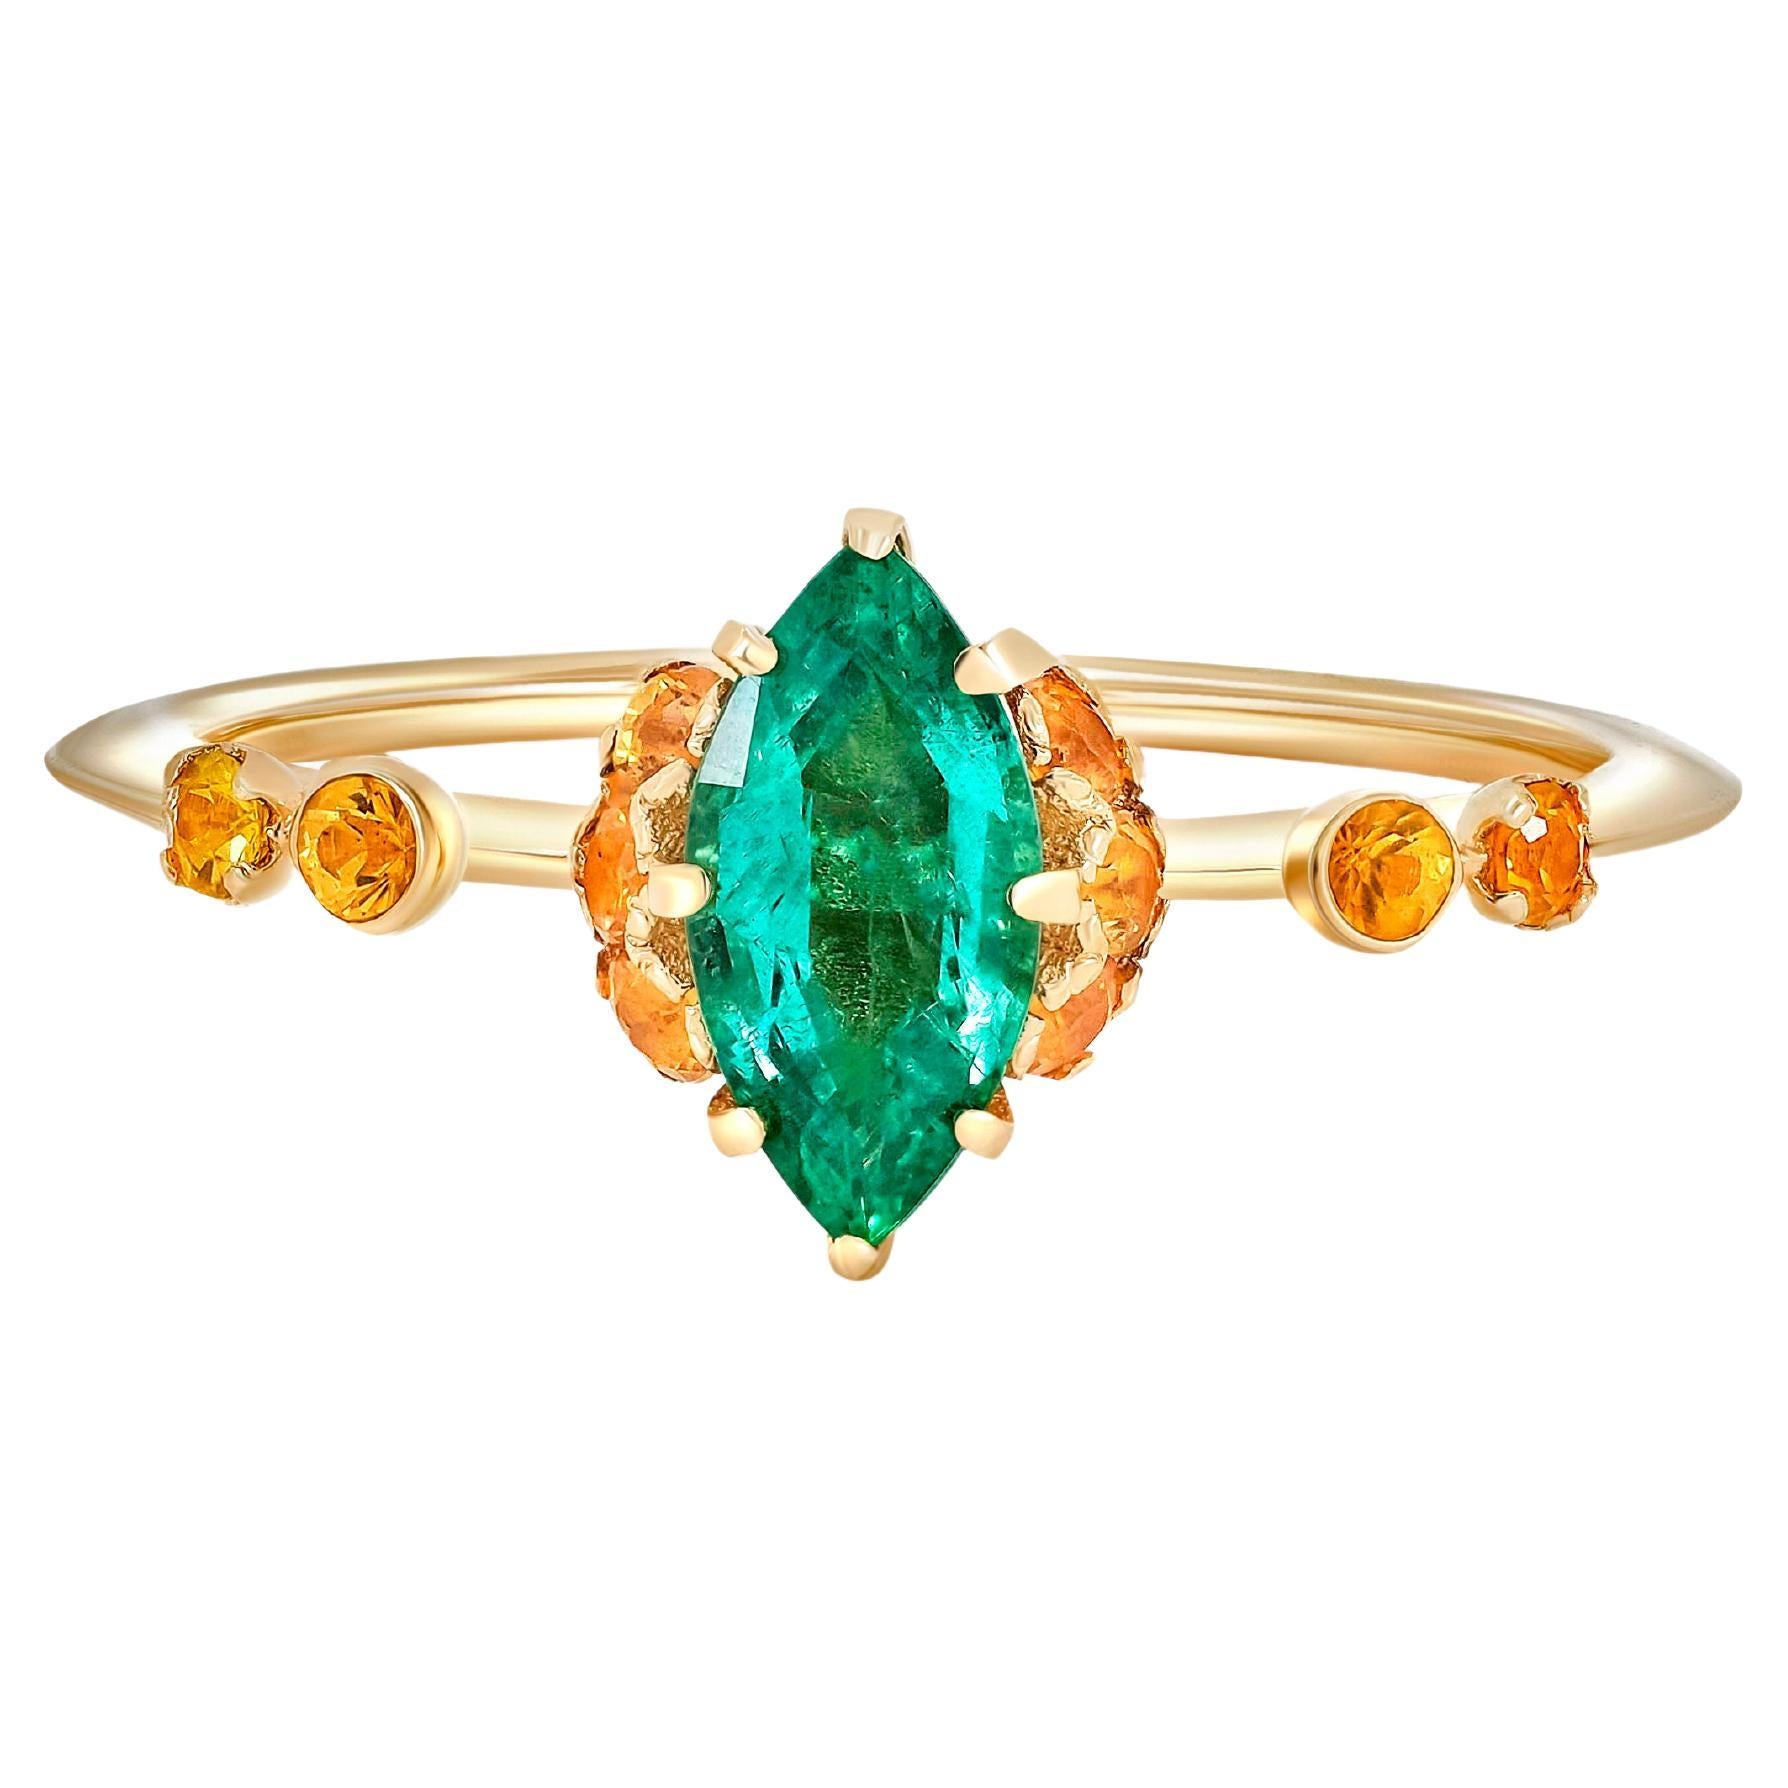 Marquise cut emerald ring. 